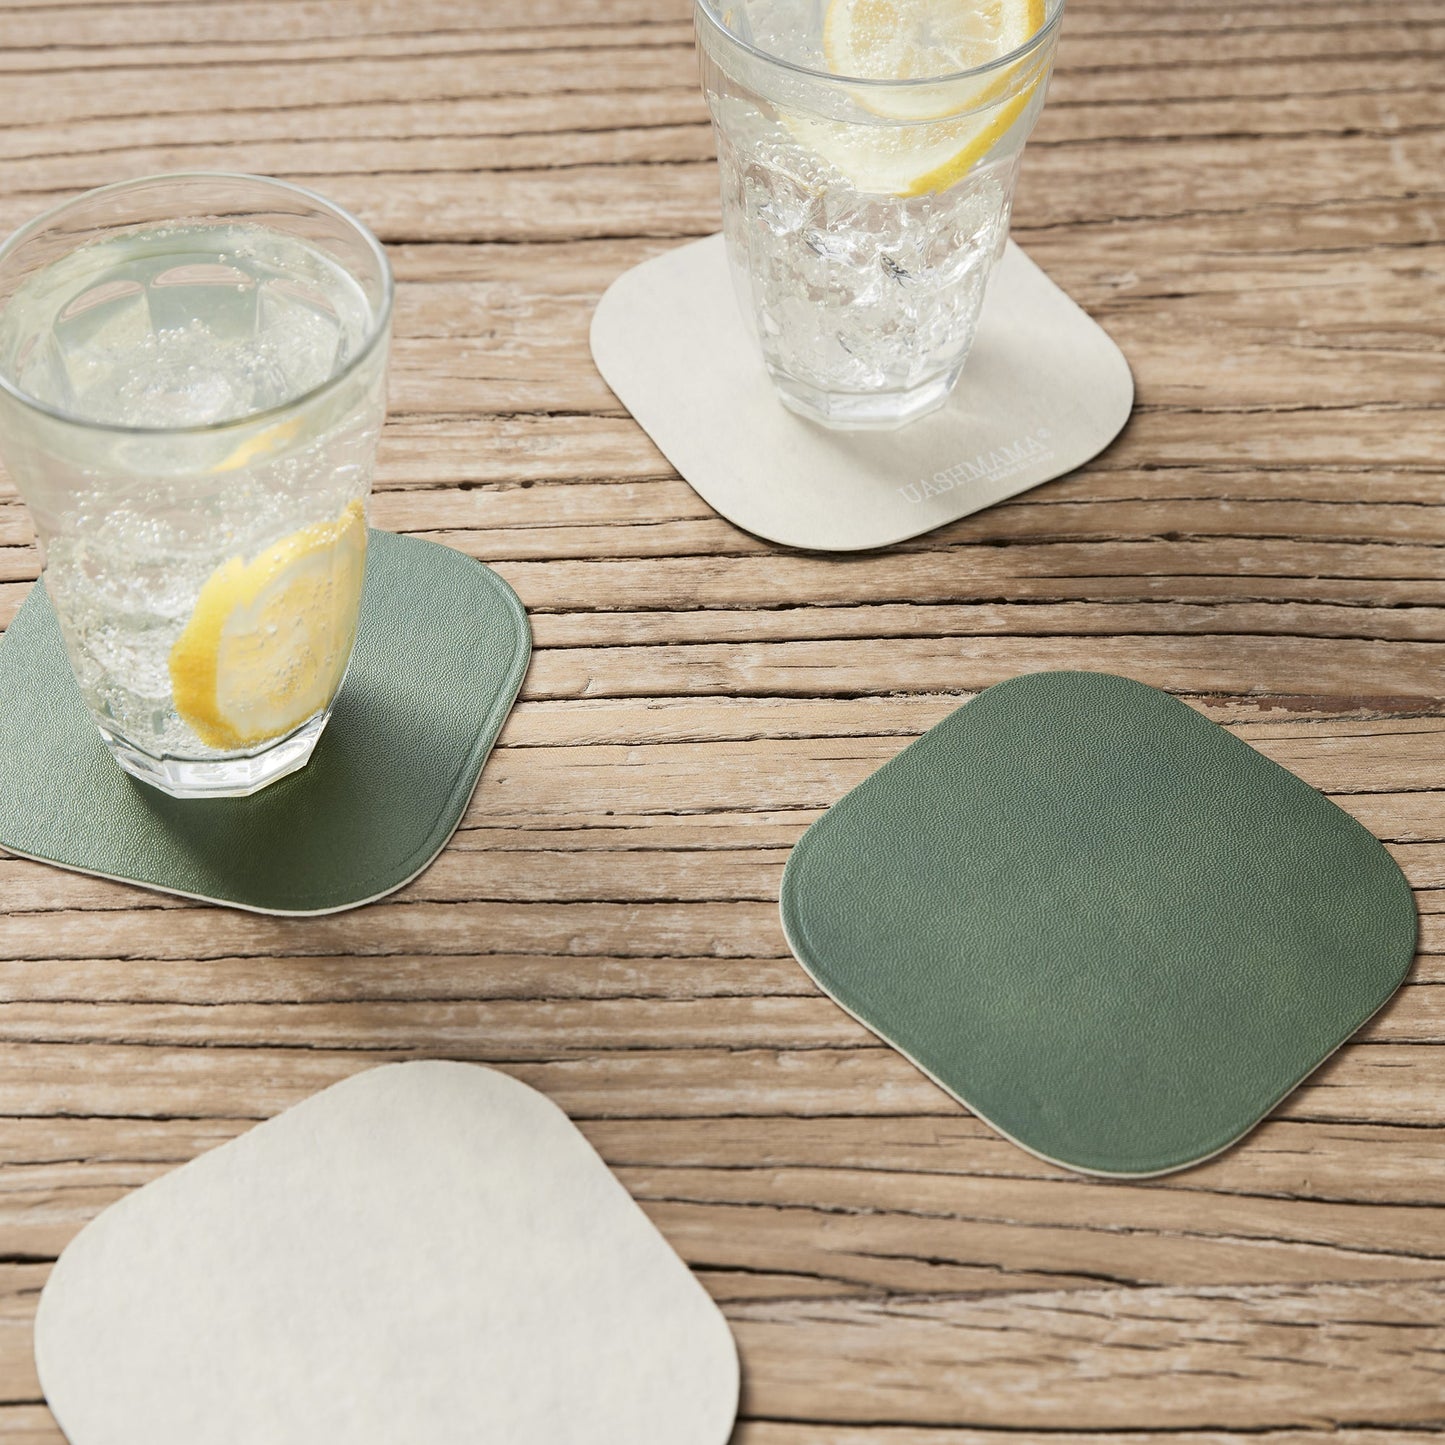 Two water glasses sit atop washable paper coasters, one in white and another in green. Another white and another green washable paper coaster sit in the foreground, atop a wooden table.